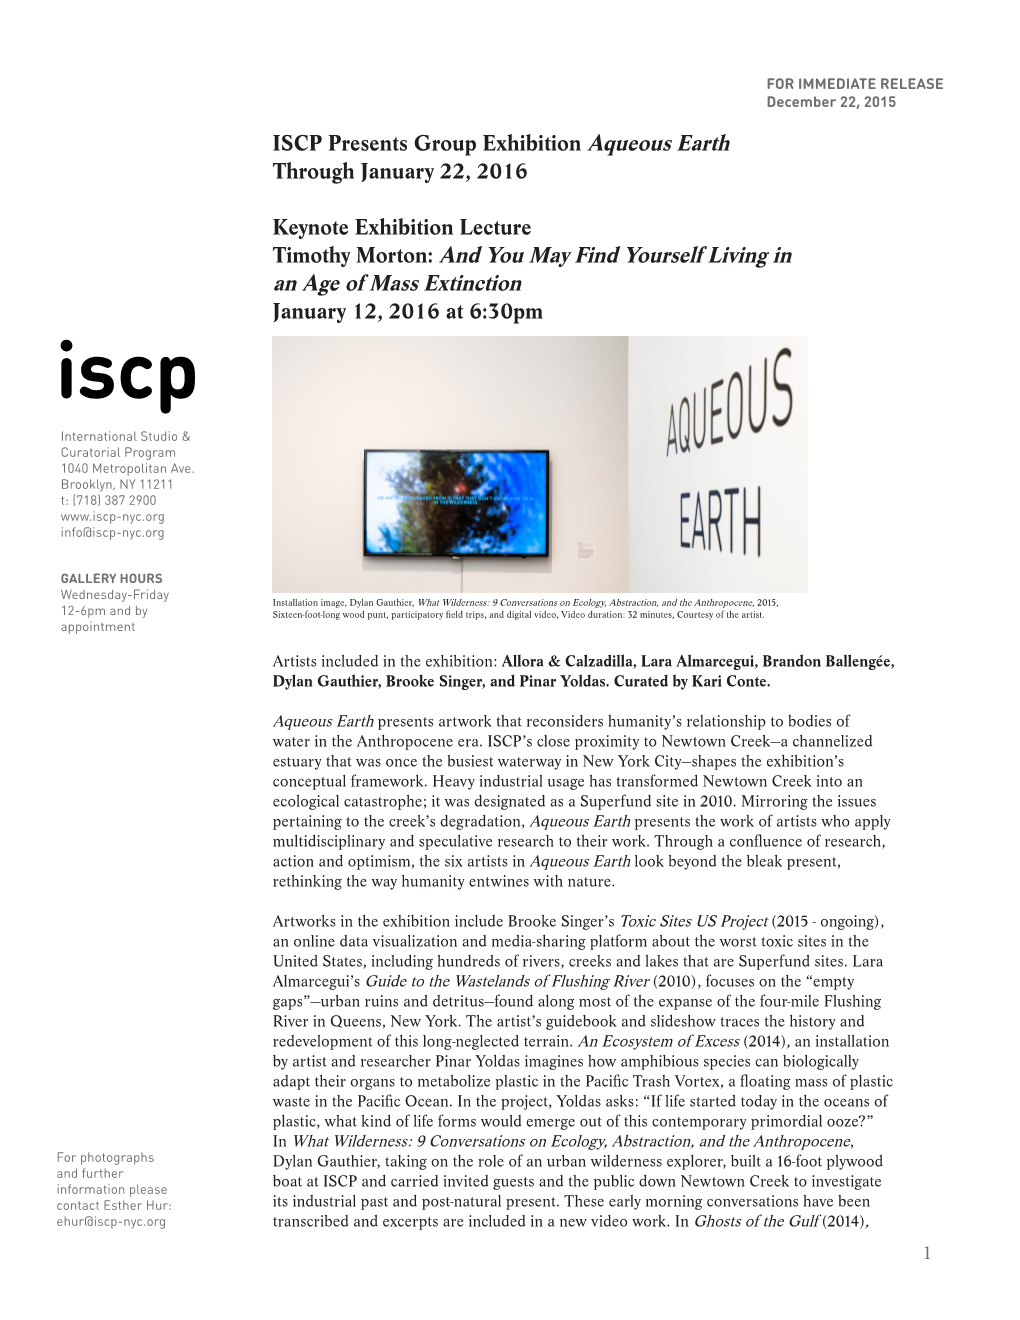 ISCP Presents Group Exhibition Aqueous Earth Through January 22, 2016